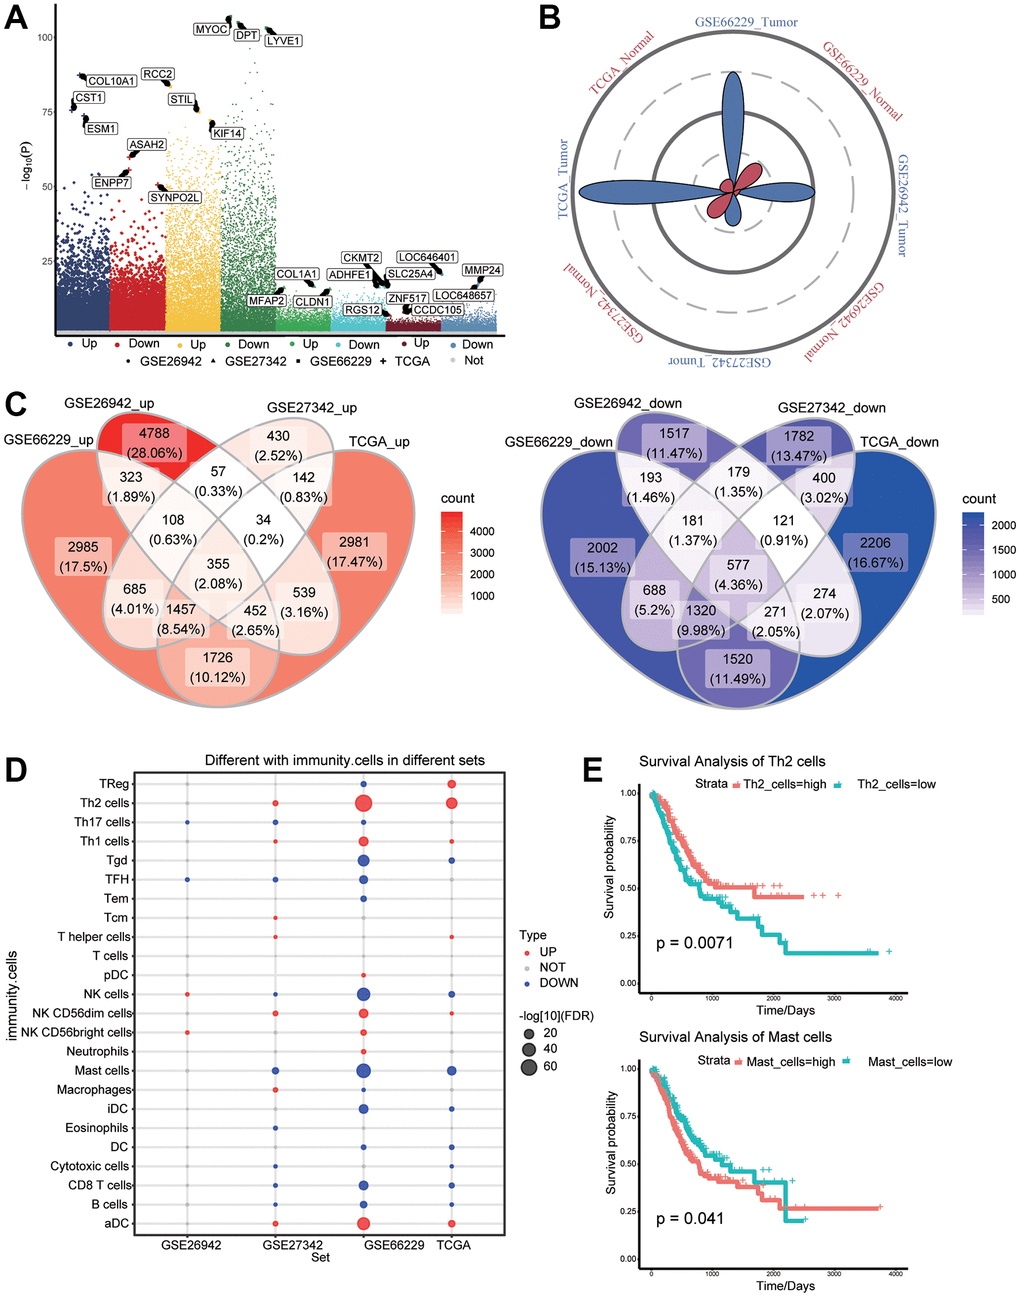 Differentially expressed genes (DEGs) and immune cell infiltration in gastric cancer and normal tissues. (A) DEGs between gastric cancer and normal tissues in The Cancer Genome Atlas (TCGA) as well as GSE26942, GSE27342, and GSE66229 datasets. (B) Petal plots of sample size for four sets of gastric cancer-related data. (C) Overexpressed (left panel) and under expressed (right panel) genes considered as DEGs in the TCGA data. (D) Differential infiltration of immune cells between gastric cancer and normal tissues. (E) Kaplan–Meier curves showed that immune cell infiltration was related to overall survival of gastric cancer patients.